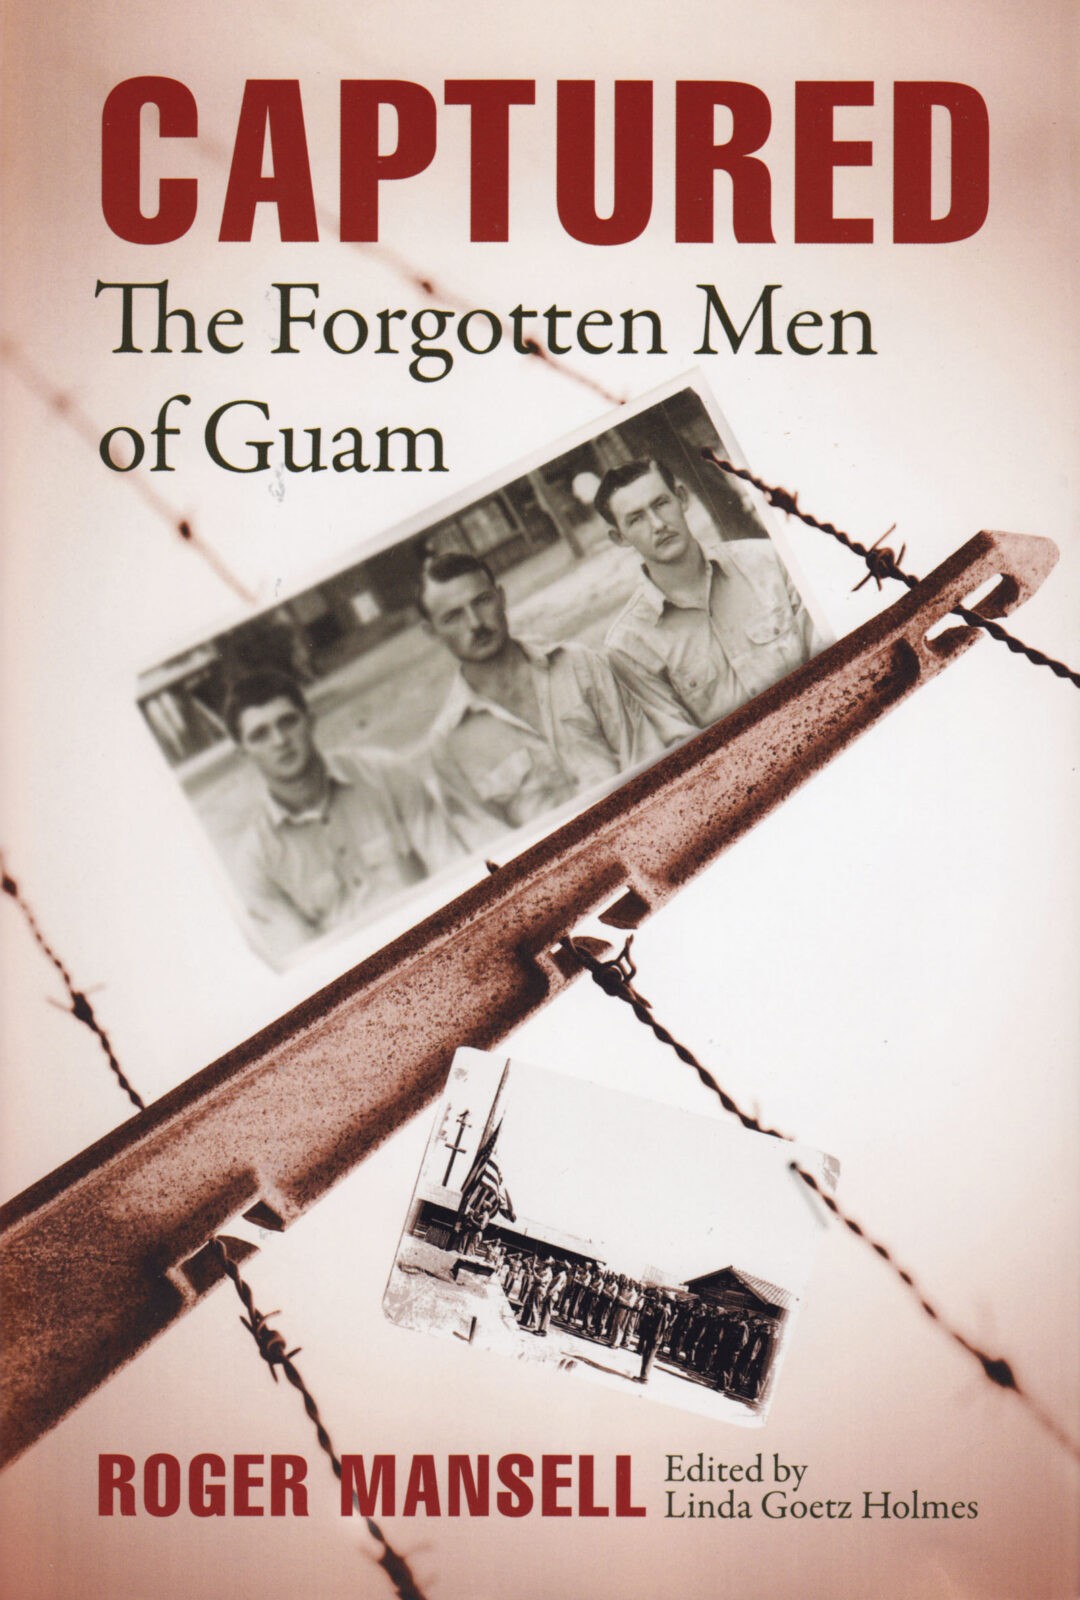 BOOK REVIEW - Captured: The Forgotten Men of Guam | Naval Historical